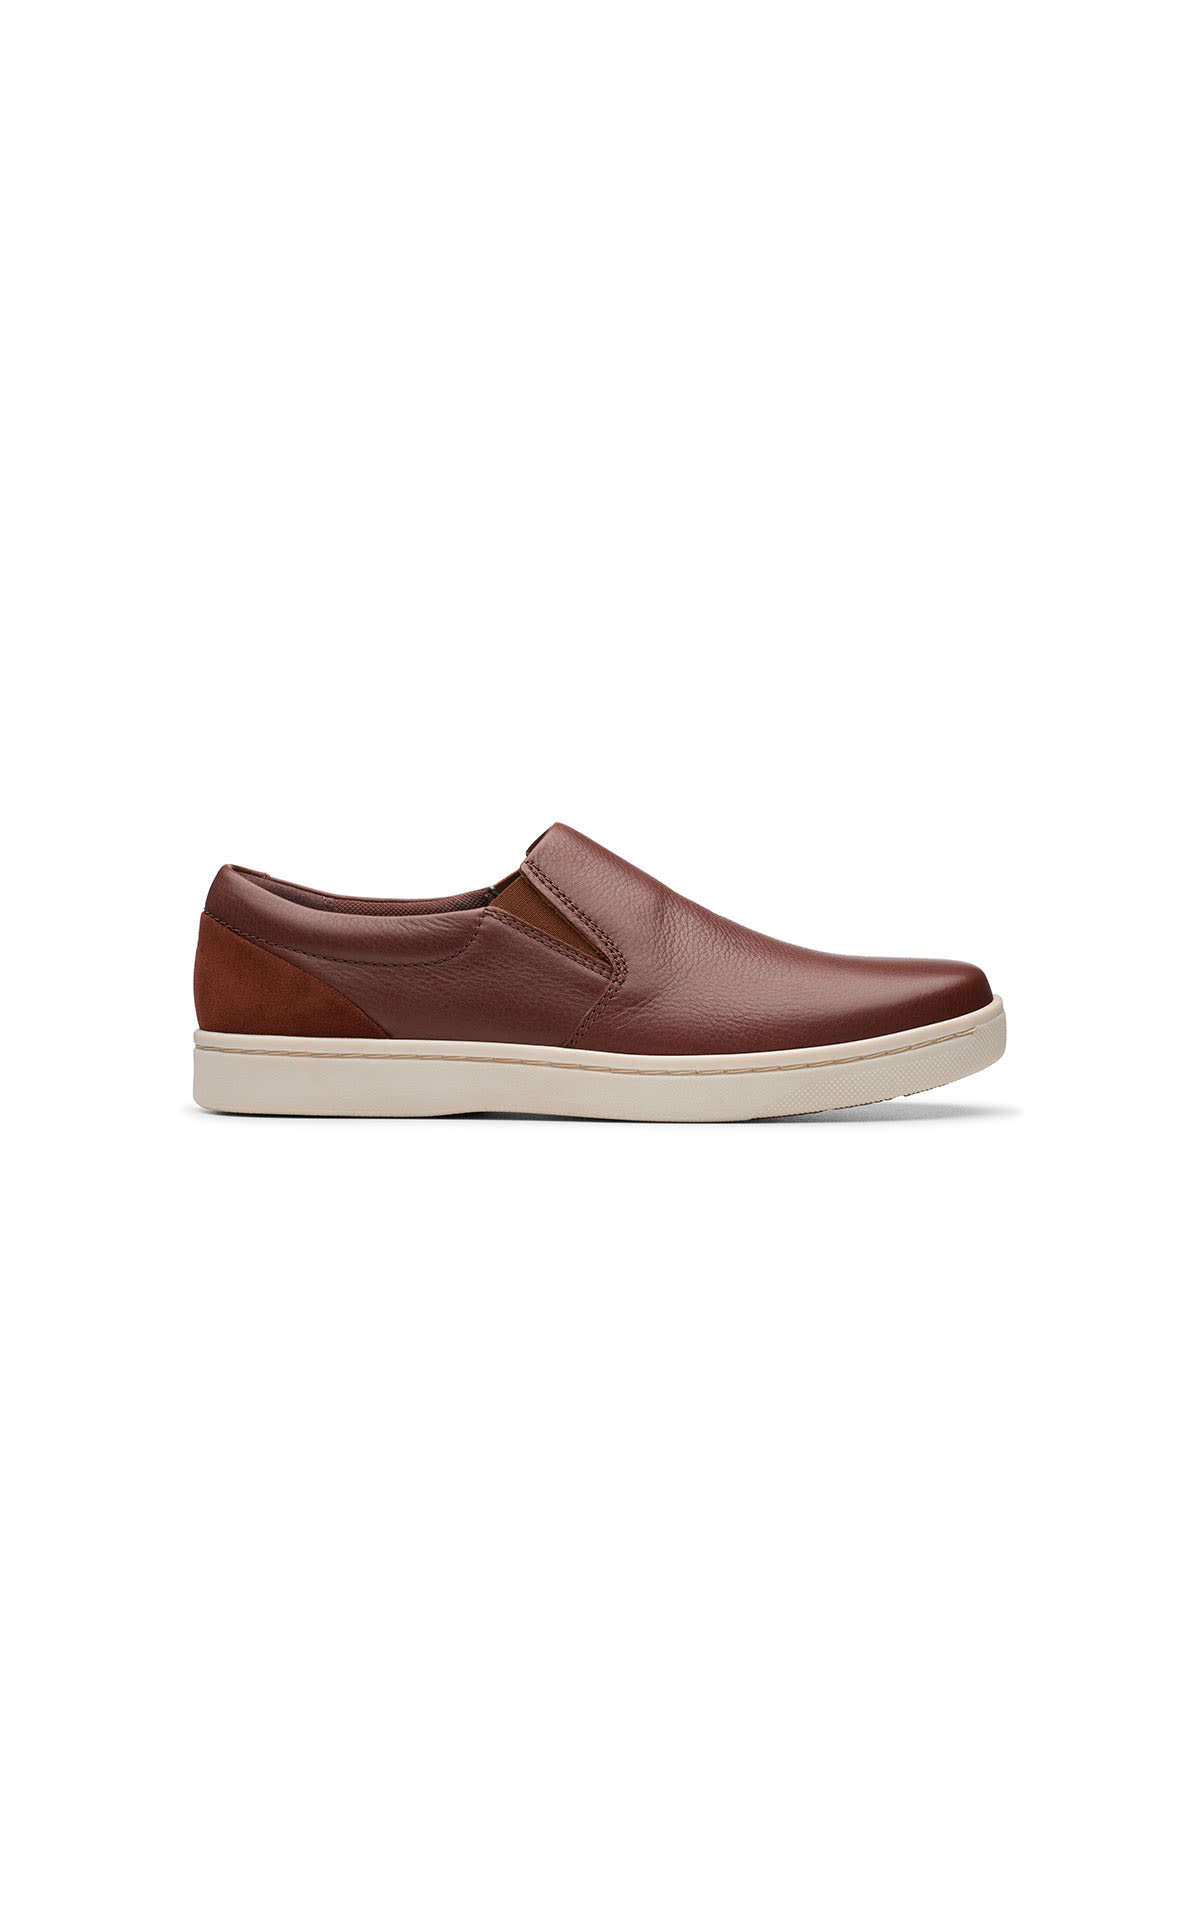 Clarks Kitna free maghogany from Bicester Village